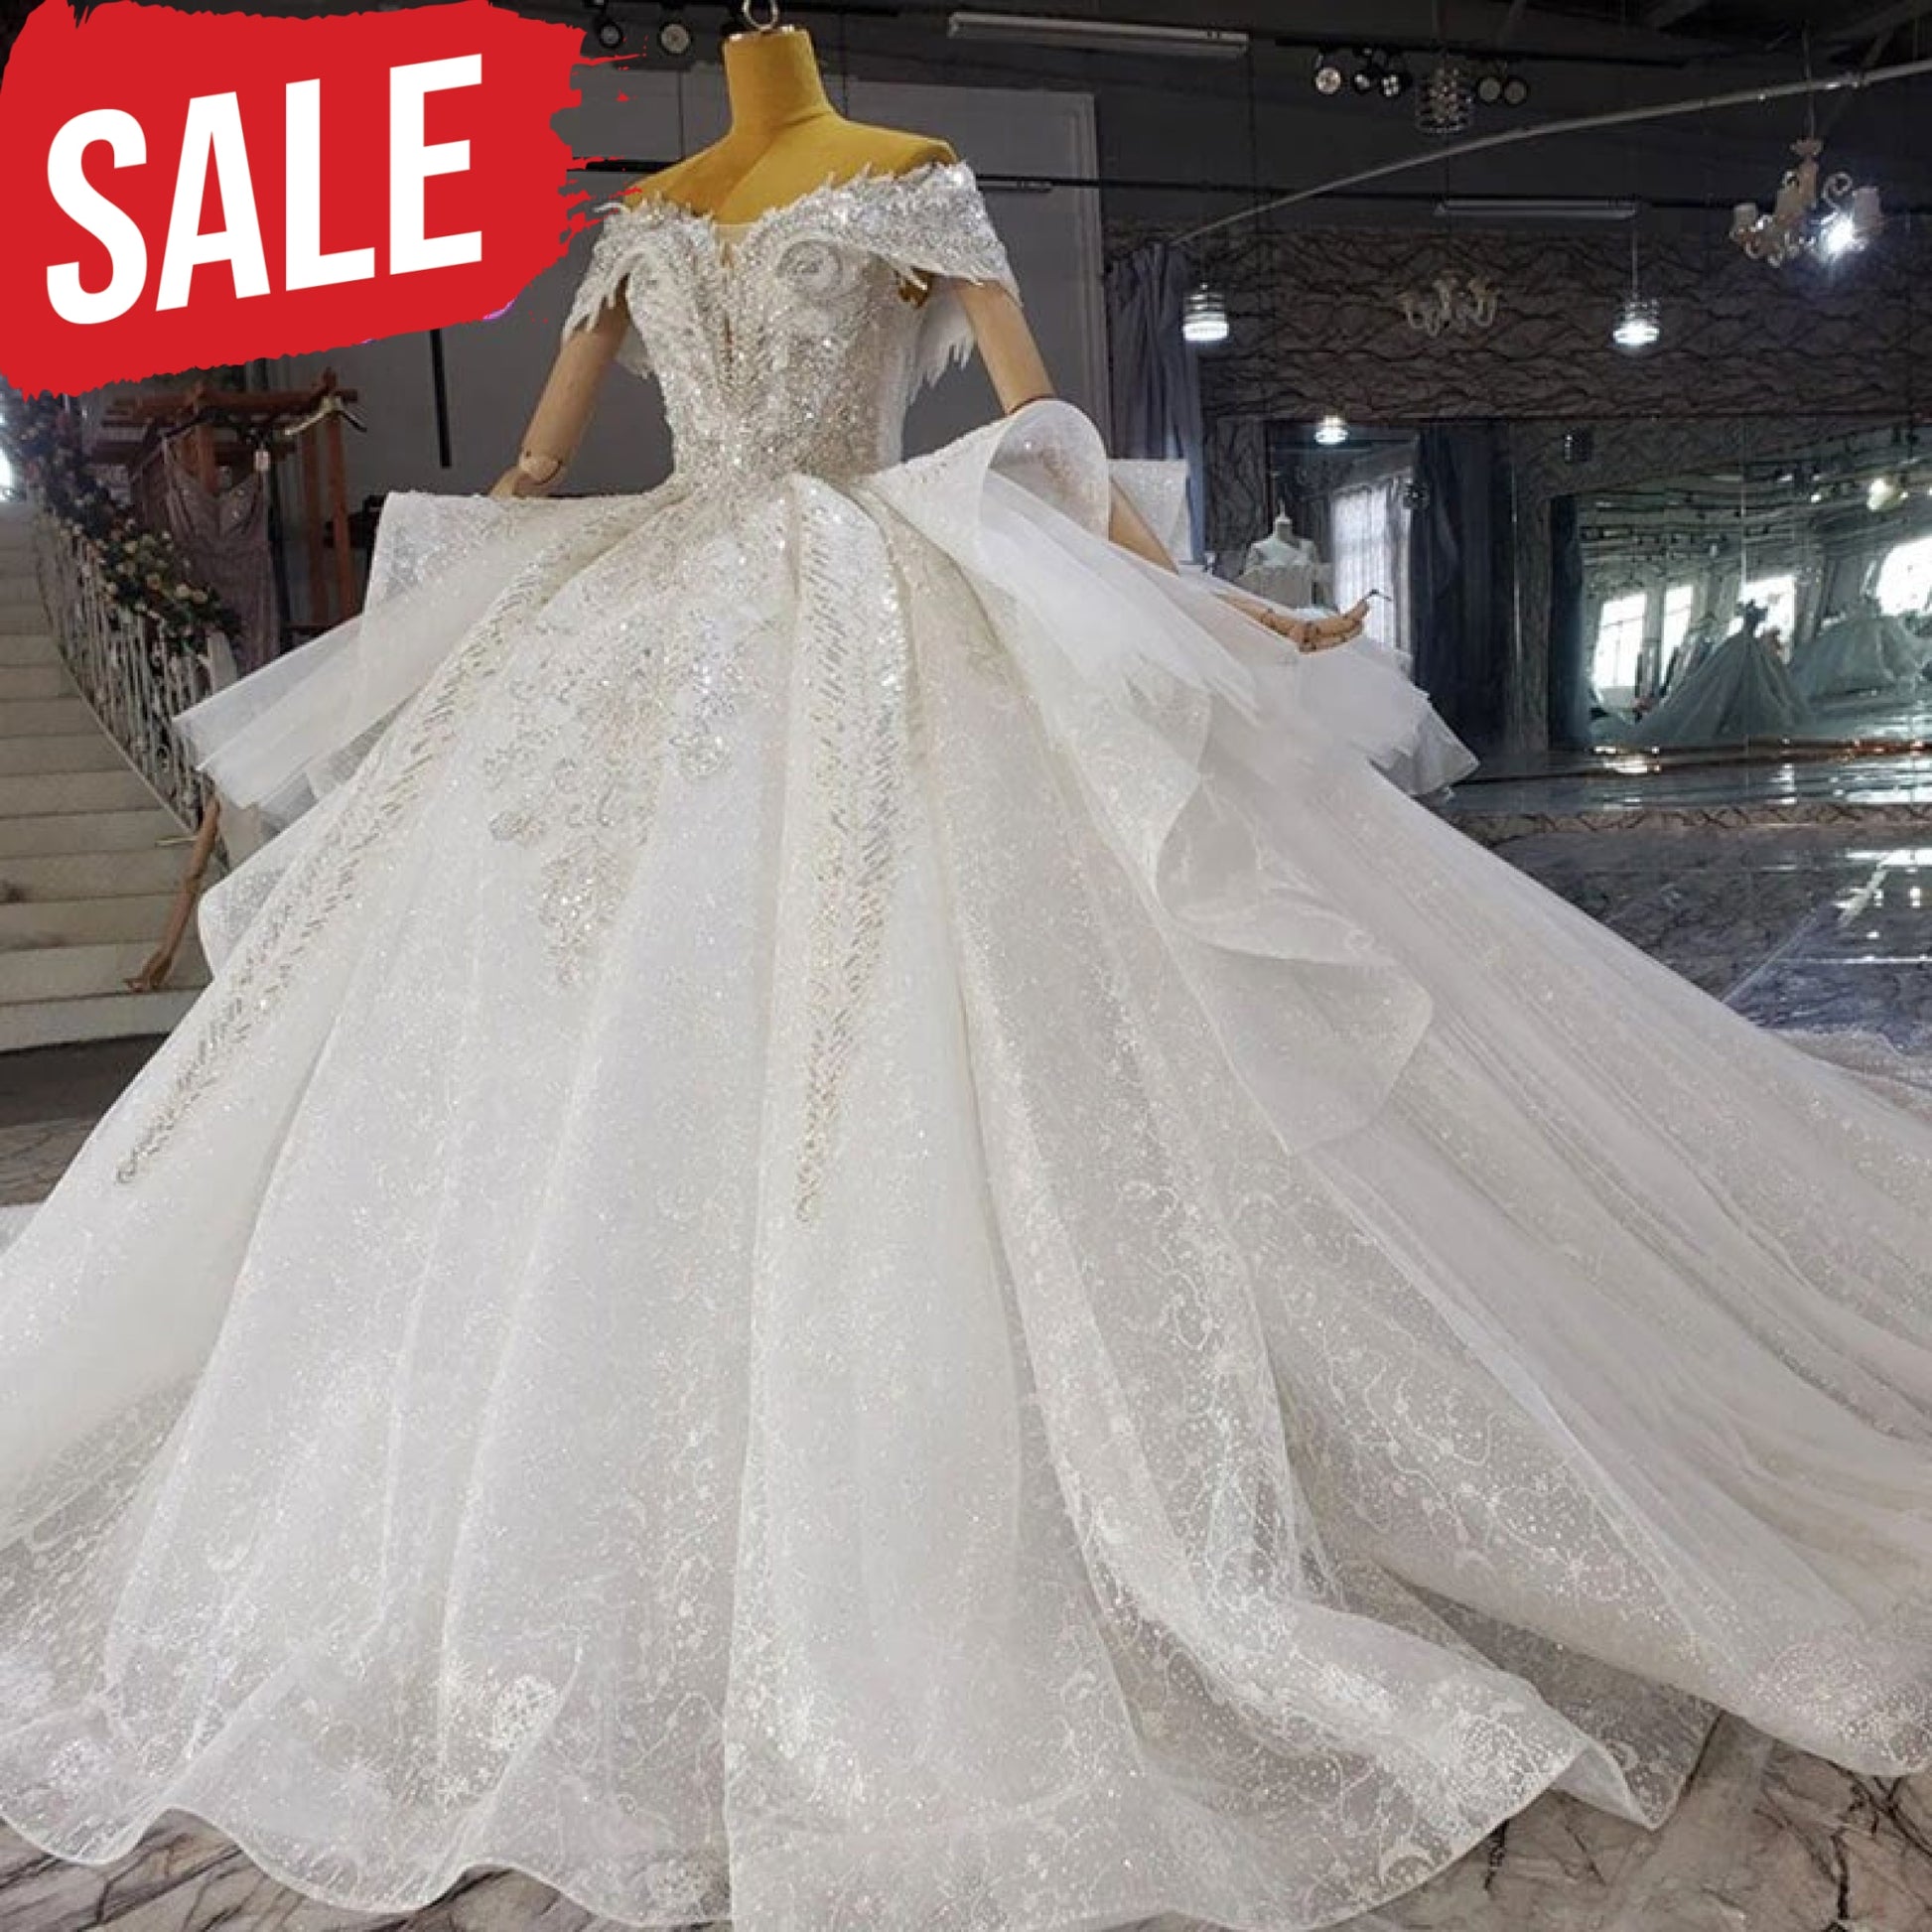 Luxurious Medieval White Wedding Gowns bLuxurious Medieval White Wedding Gown Luxurious Medieval White Wedding Gowns Luxurious Medieval White Wedding Gowns Luxurious Medieval White Wedding Gowns Luxurious Medieval White Wedding GownsLuxurious Medieval White Wedding Gowns